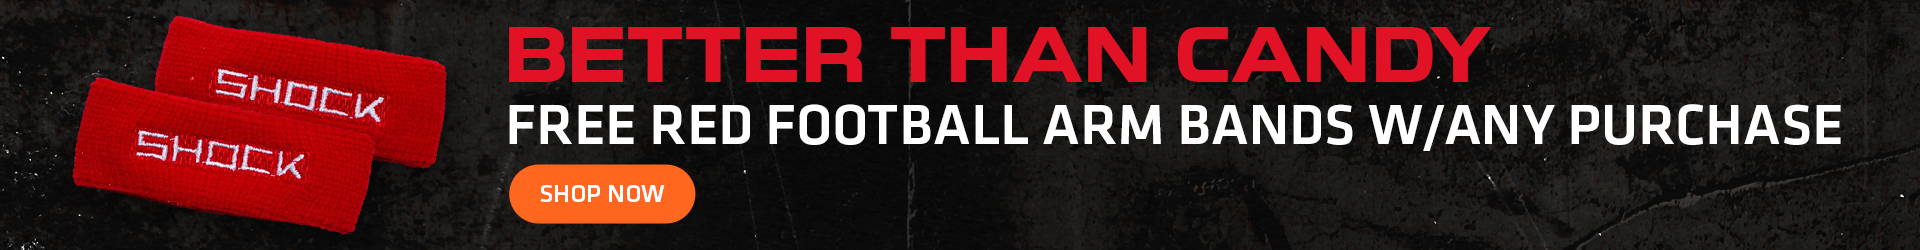 Better than candy. Free red football arm bands w/any purchase SHOP NOW